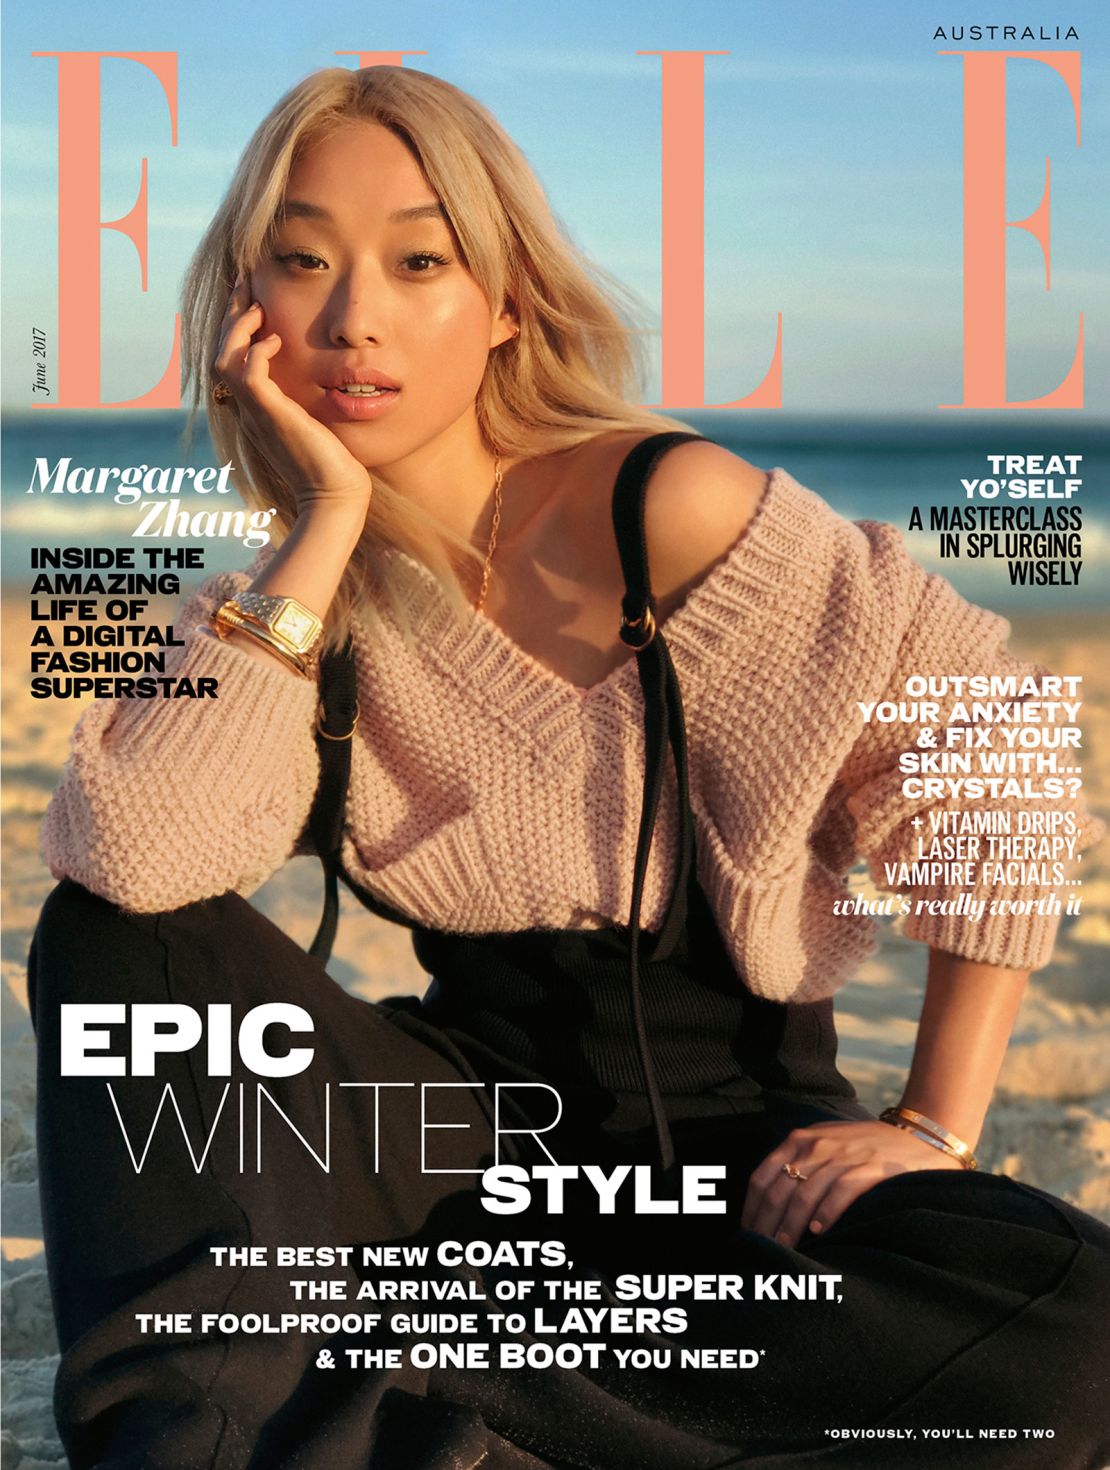 Earlier this year, Zhang featured on the cover of Elle Australia. This image was shot entirely on an iPhone, by photographer Georges Antoni. 